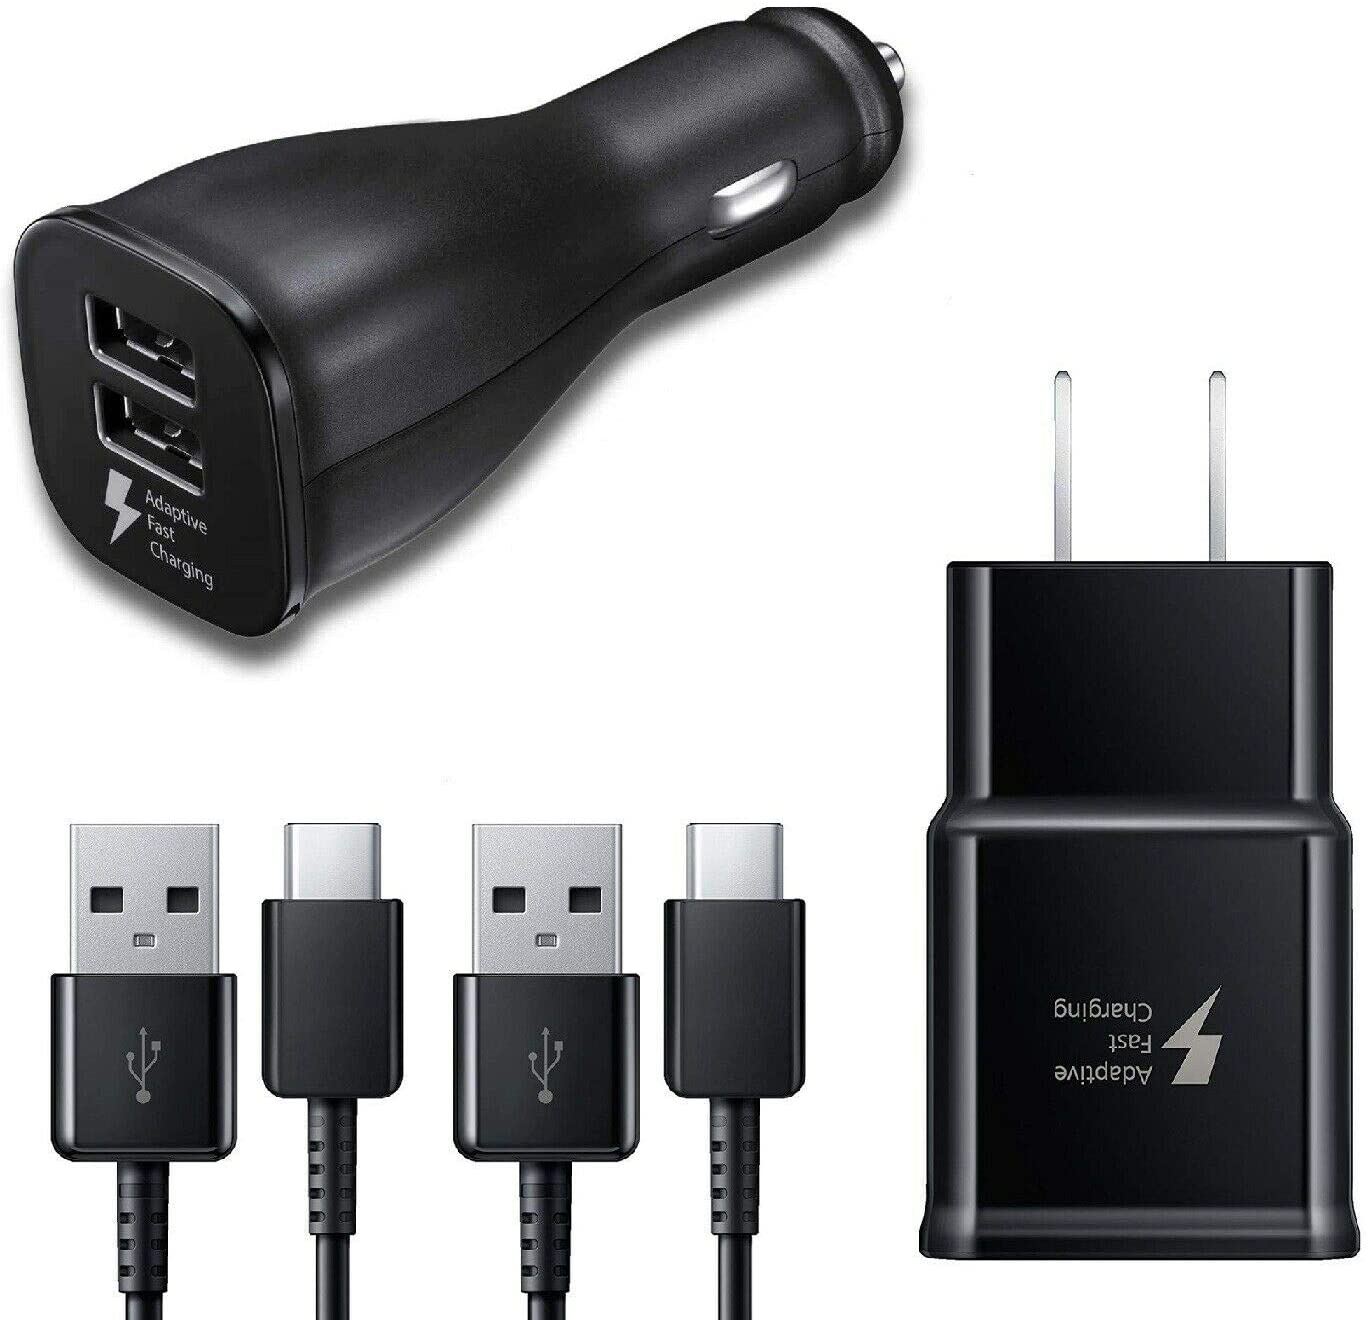 Adaptive Fast Charger Kit for Lenovo Z6, USB 2.0 Recharger Kit (Wall Charger + Car Charger + 2 x Type C USB Cables) Quick Charger-Black - image 1 of 3